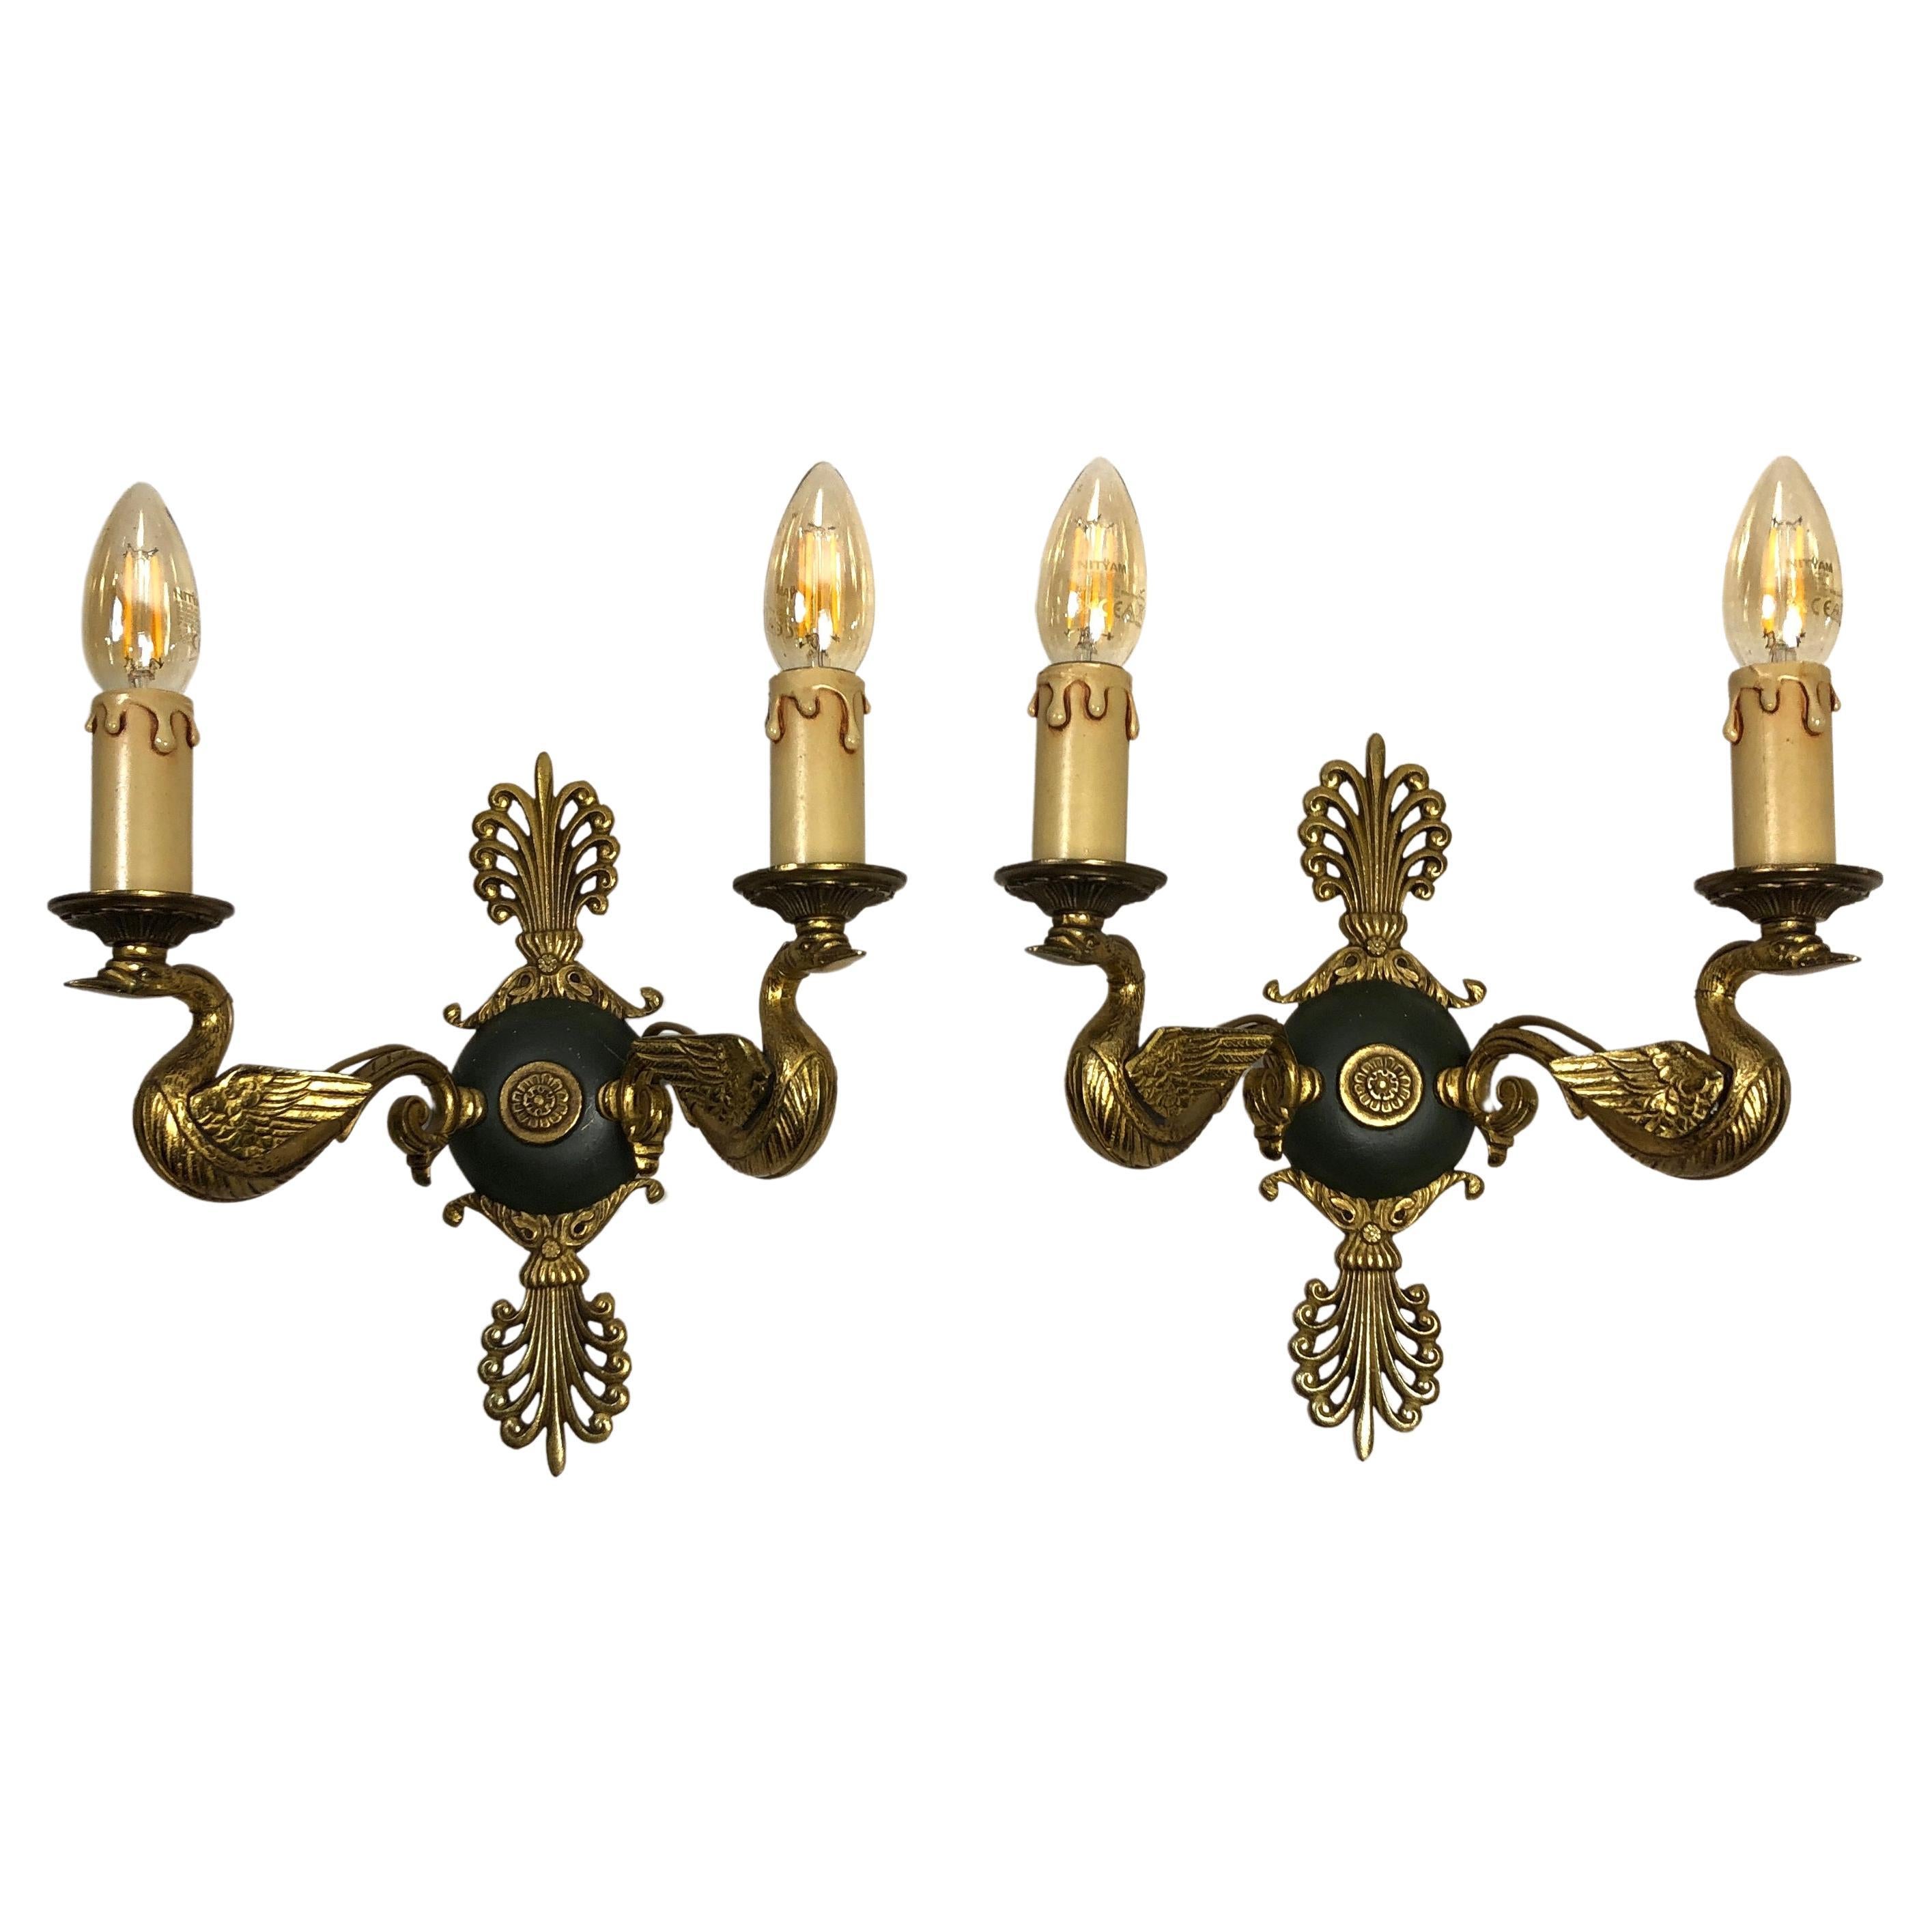 An exceptional pair of brass Empire two-light sconces from early 20th century, France. This pair is designed with a swan motif. The two brass arms are fashioned out of swans with the brass bobeches and candle covers resting on each birds' head.